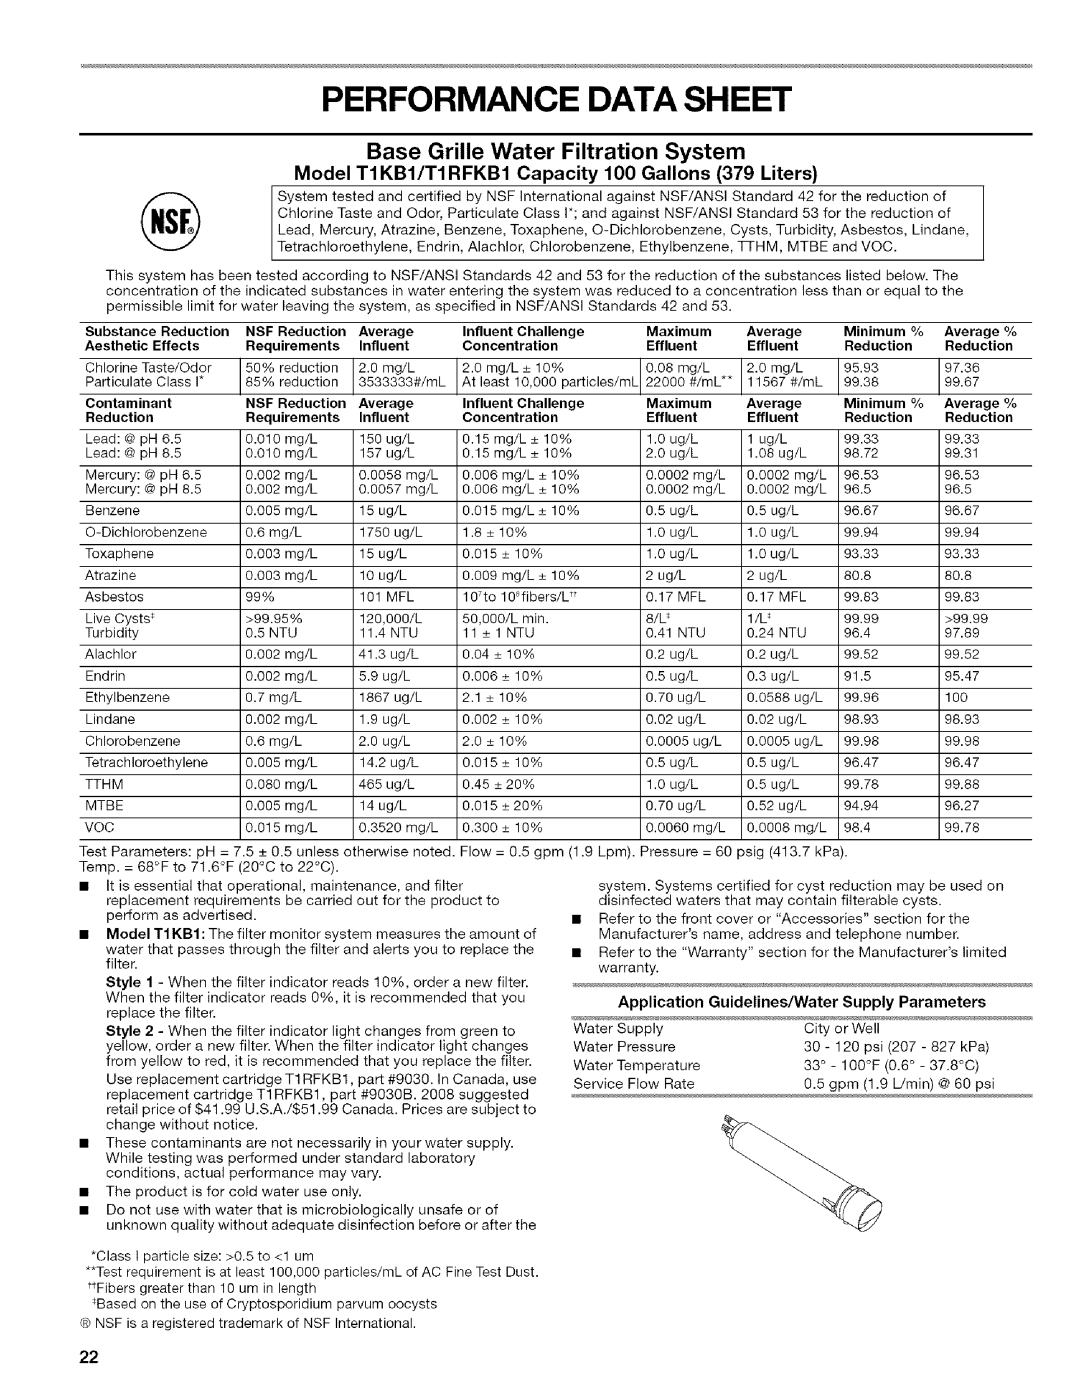 Kenmore WIOI67097A manual Performance Data Sheet, Base Grille Water Filtration System 